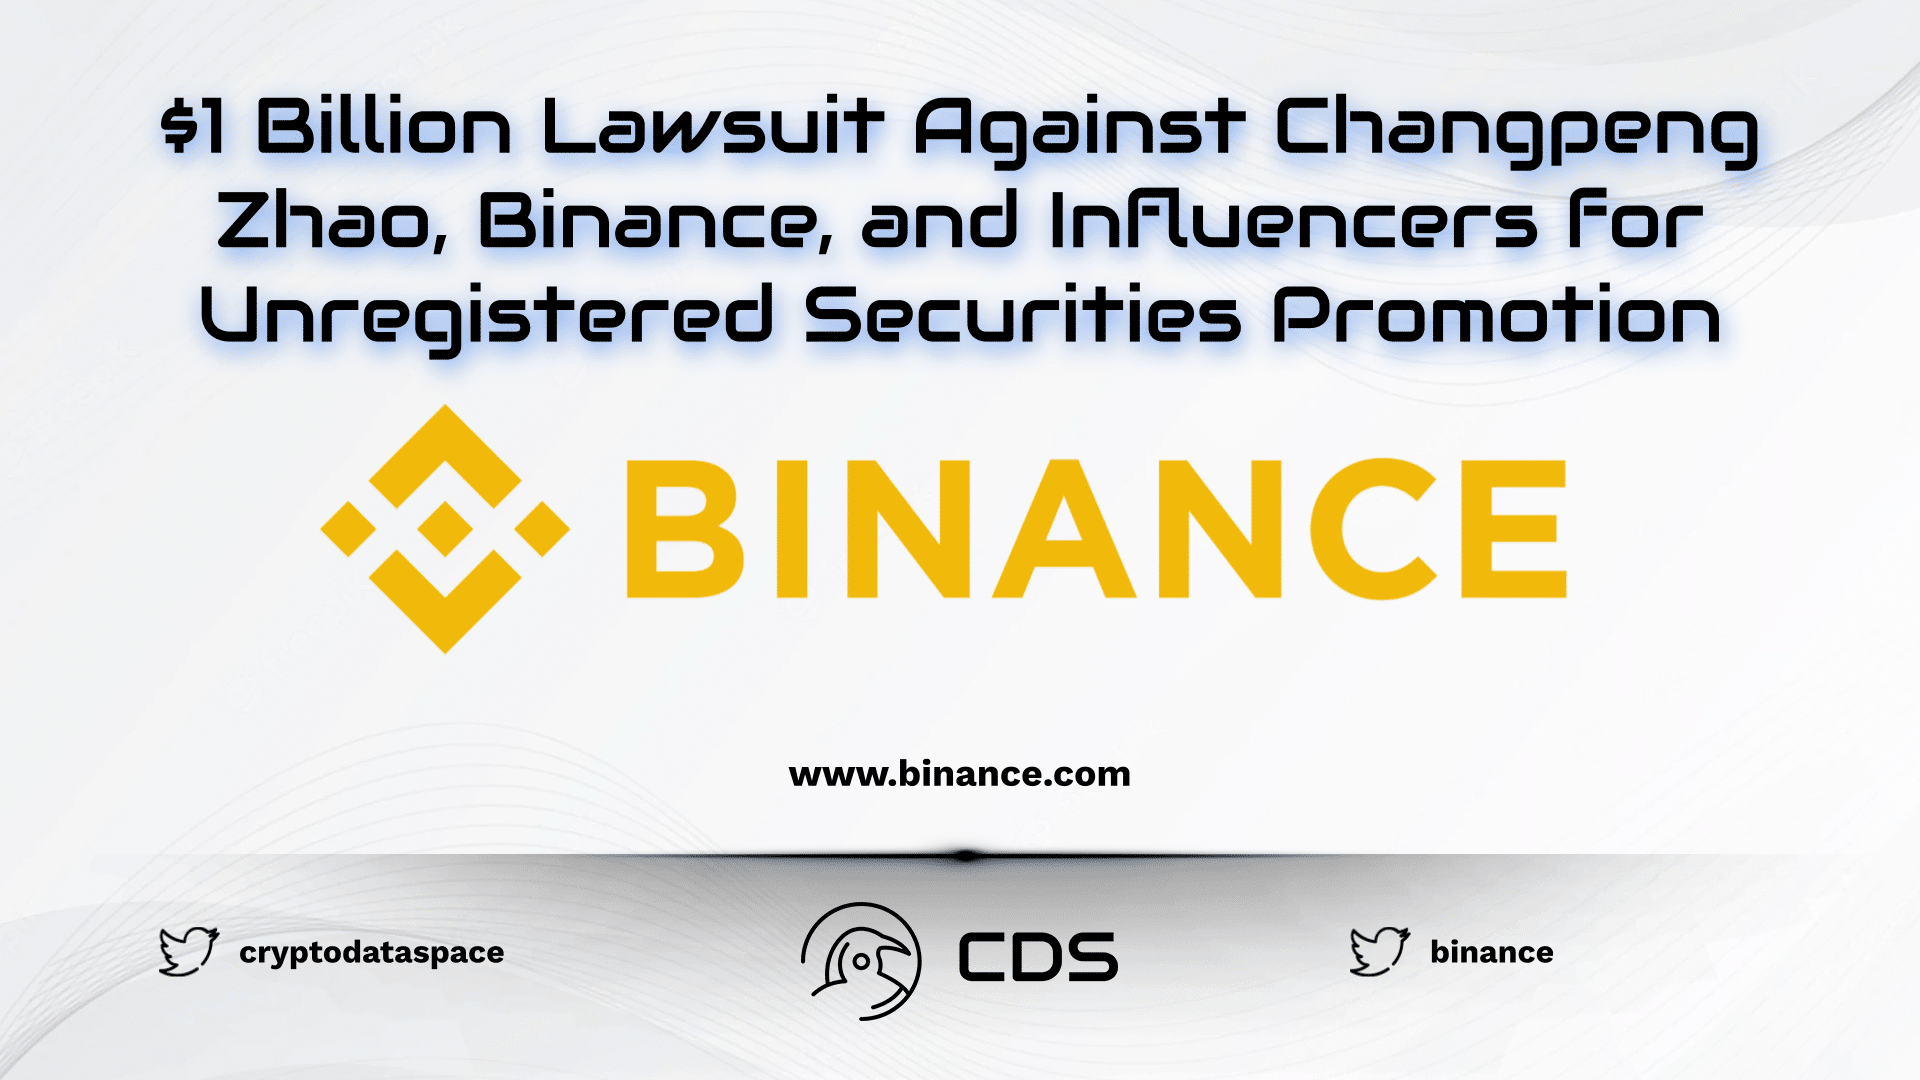 $1 Billion Lawsuit Against Changpeng Zhao, Binance, and Influencers for Unregistered Securities Promotion